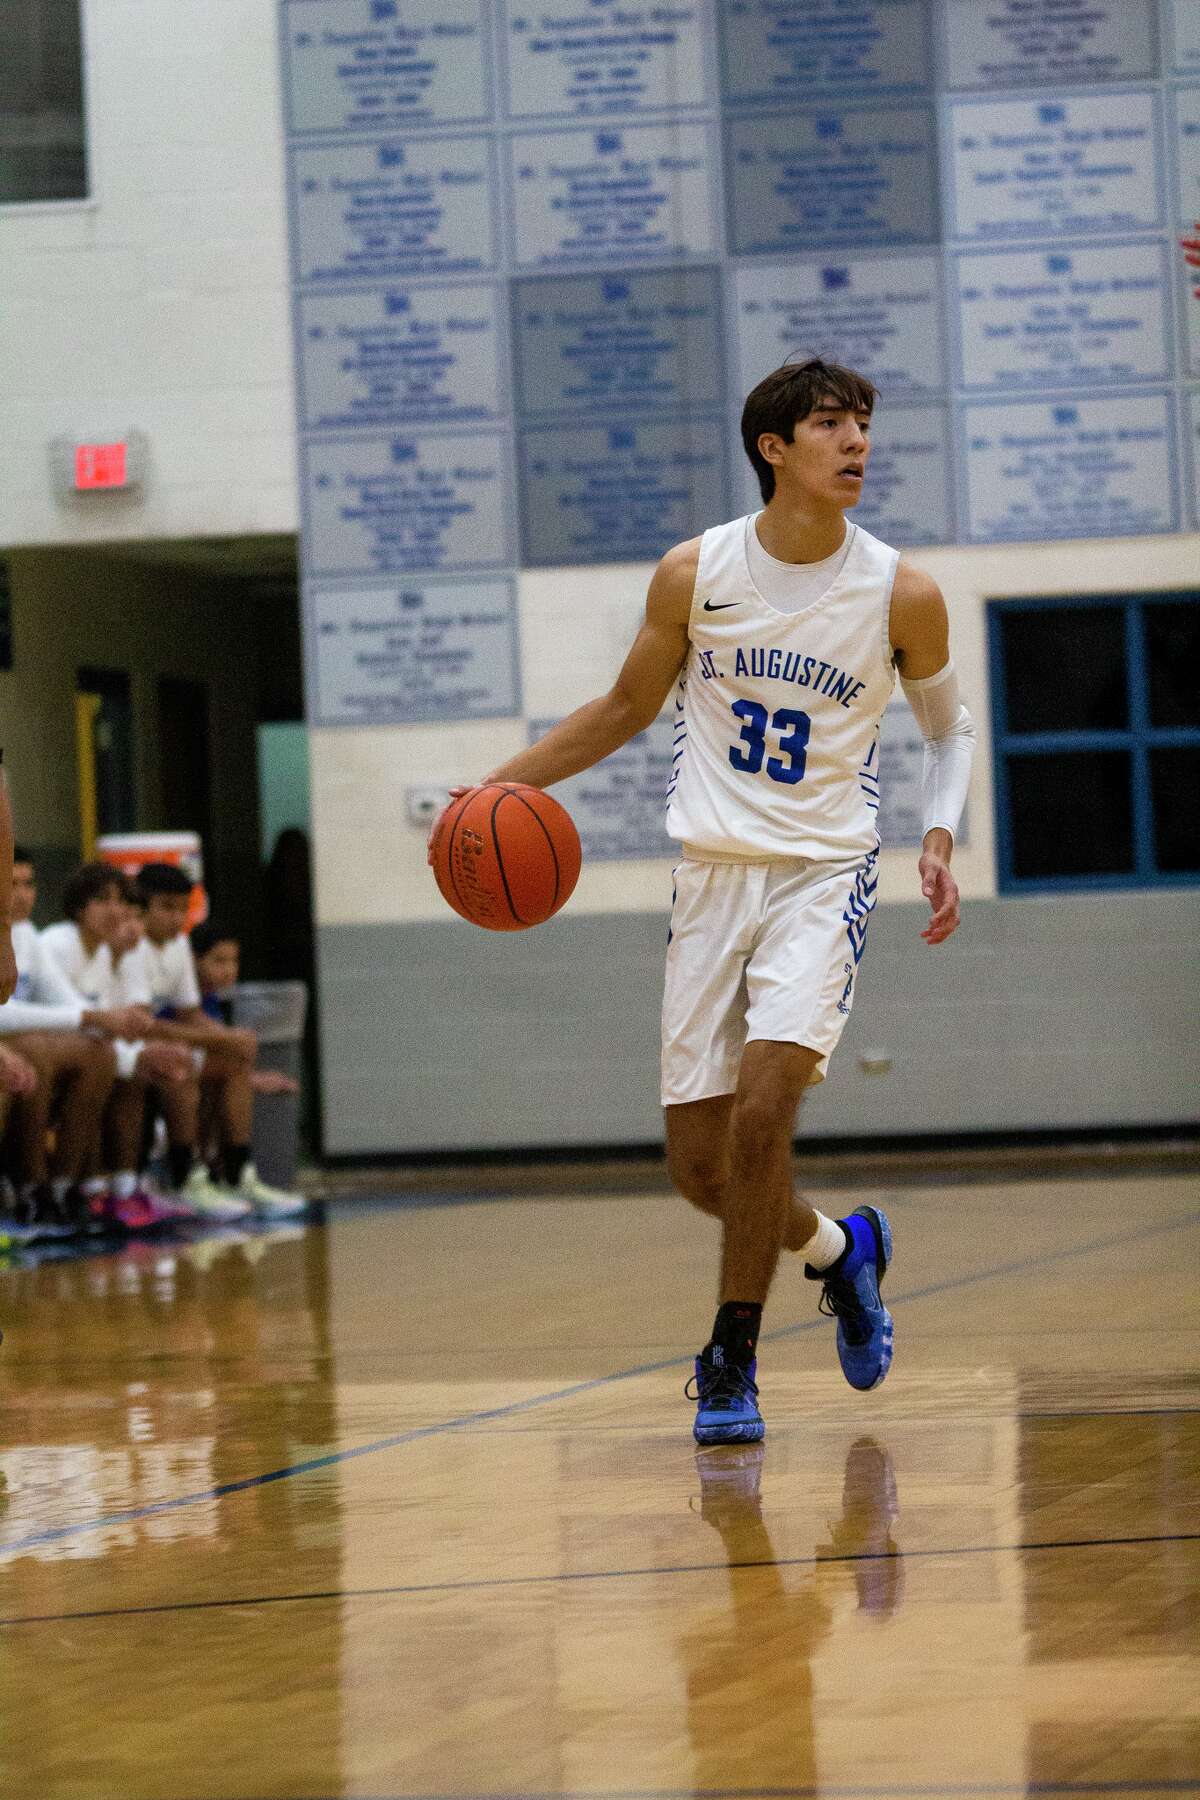 Octavio Benavides and the St. Augustine Knights defeated the Alexander Bulldogs 45-41 on Friday.